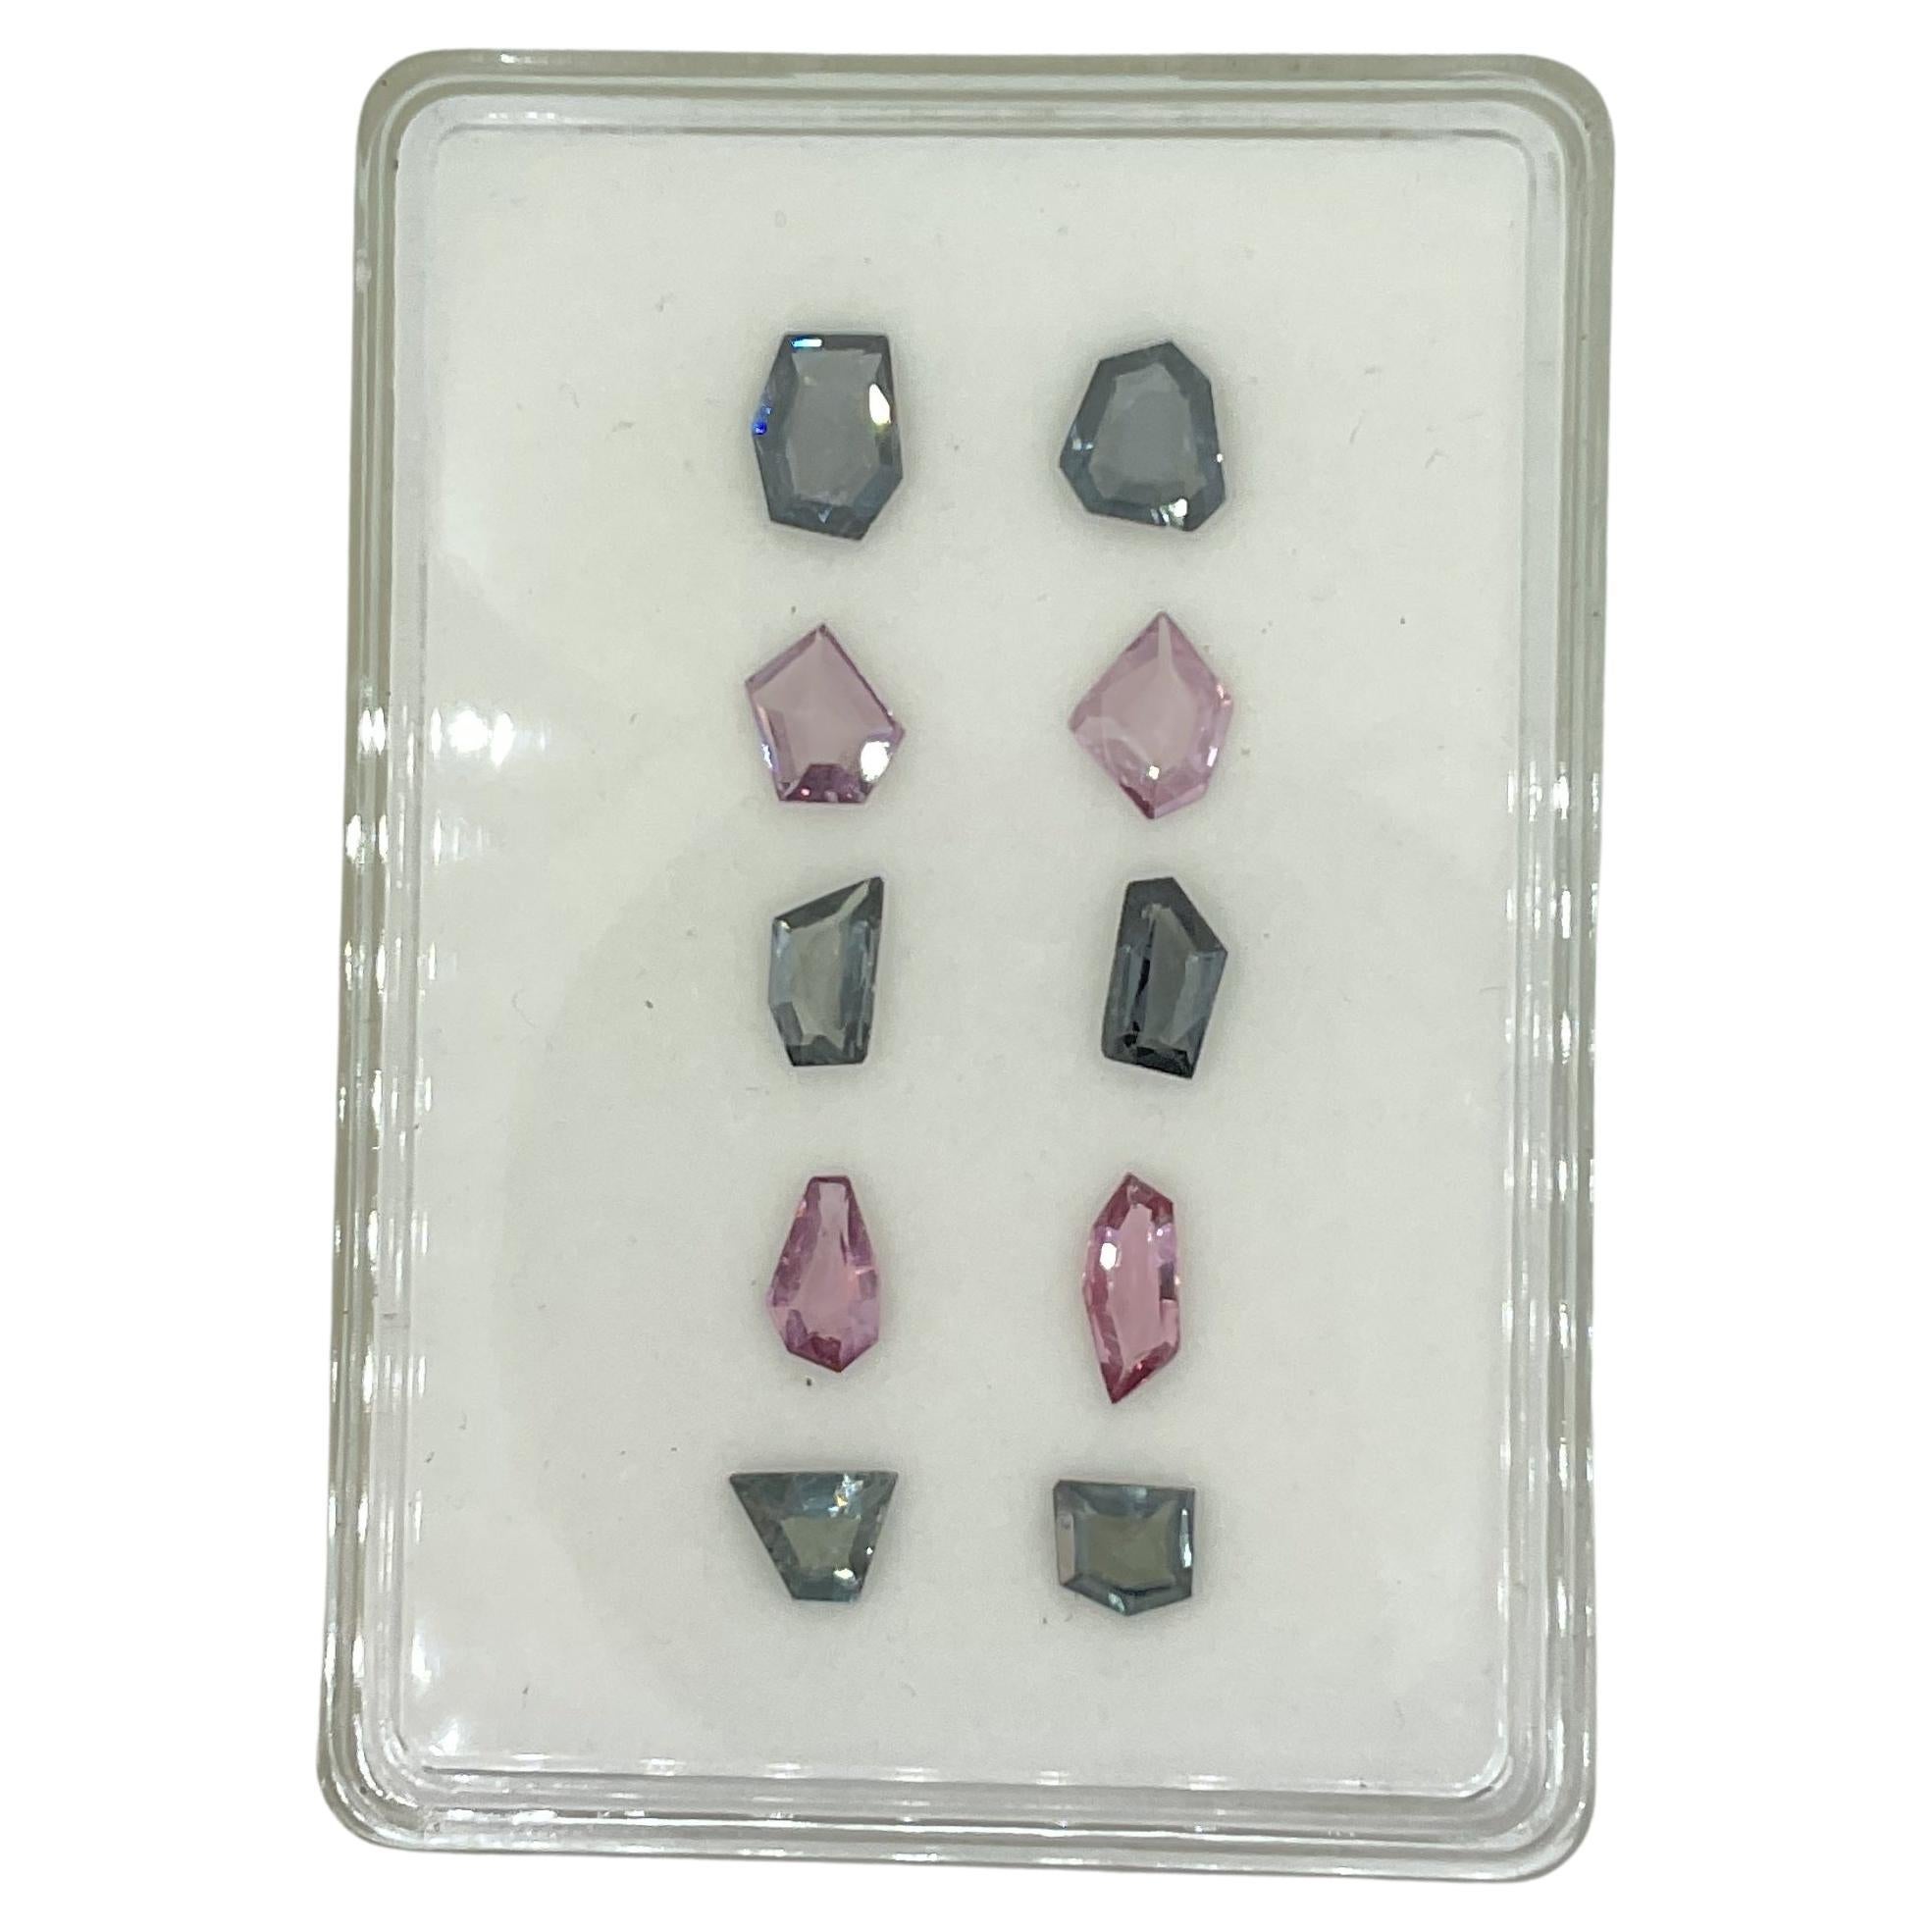 12.35 Carats Grey & Pink Spinel Fancy Cut Stone Natural Gem For Top Fine Jewelry For Sale